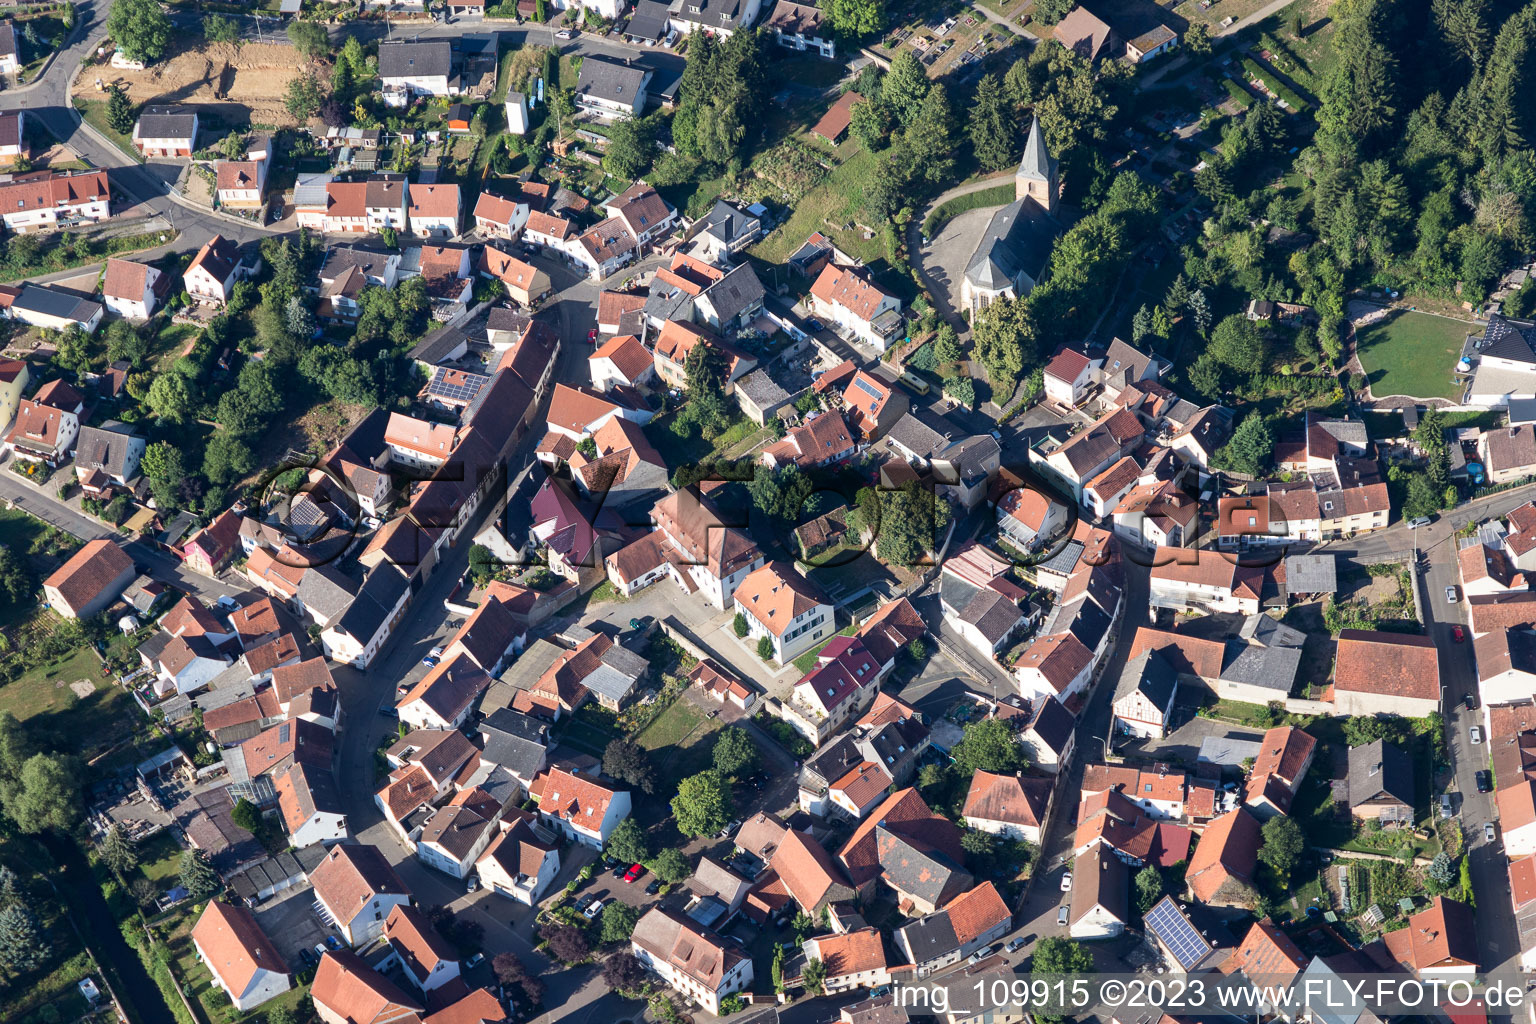 Aerial photograpy of Alsenz in the state Rhineland-Palatinate, Germany